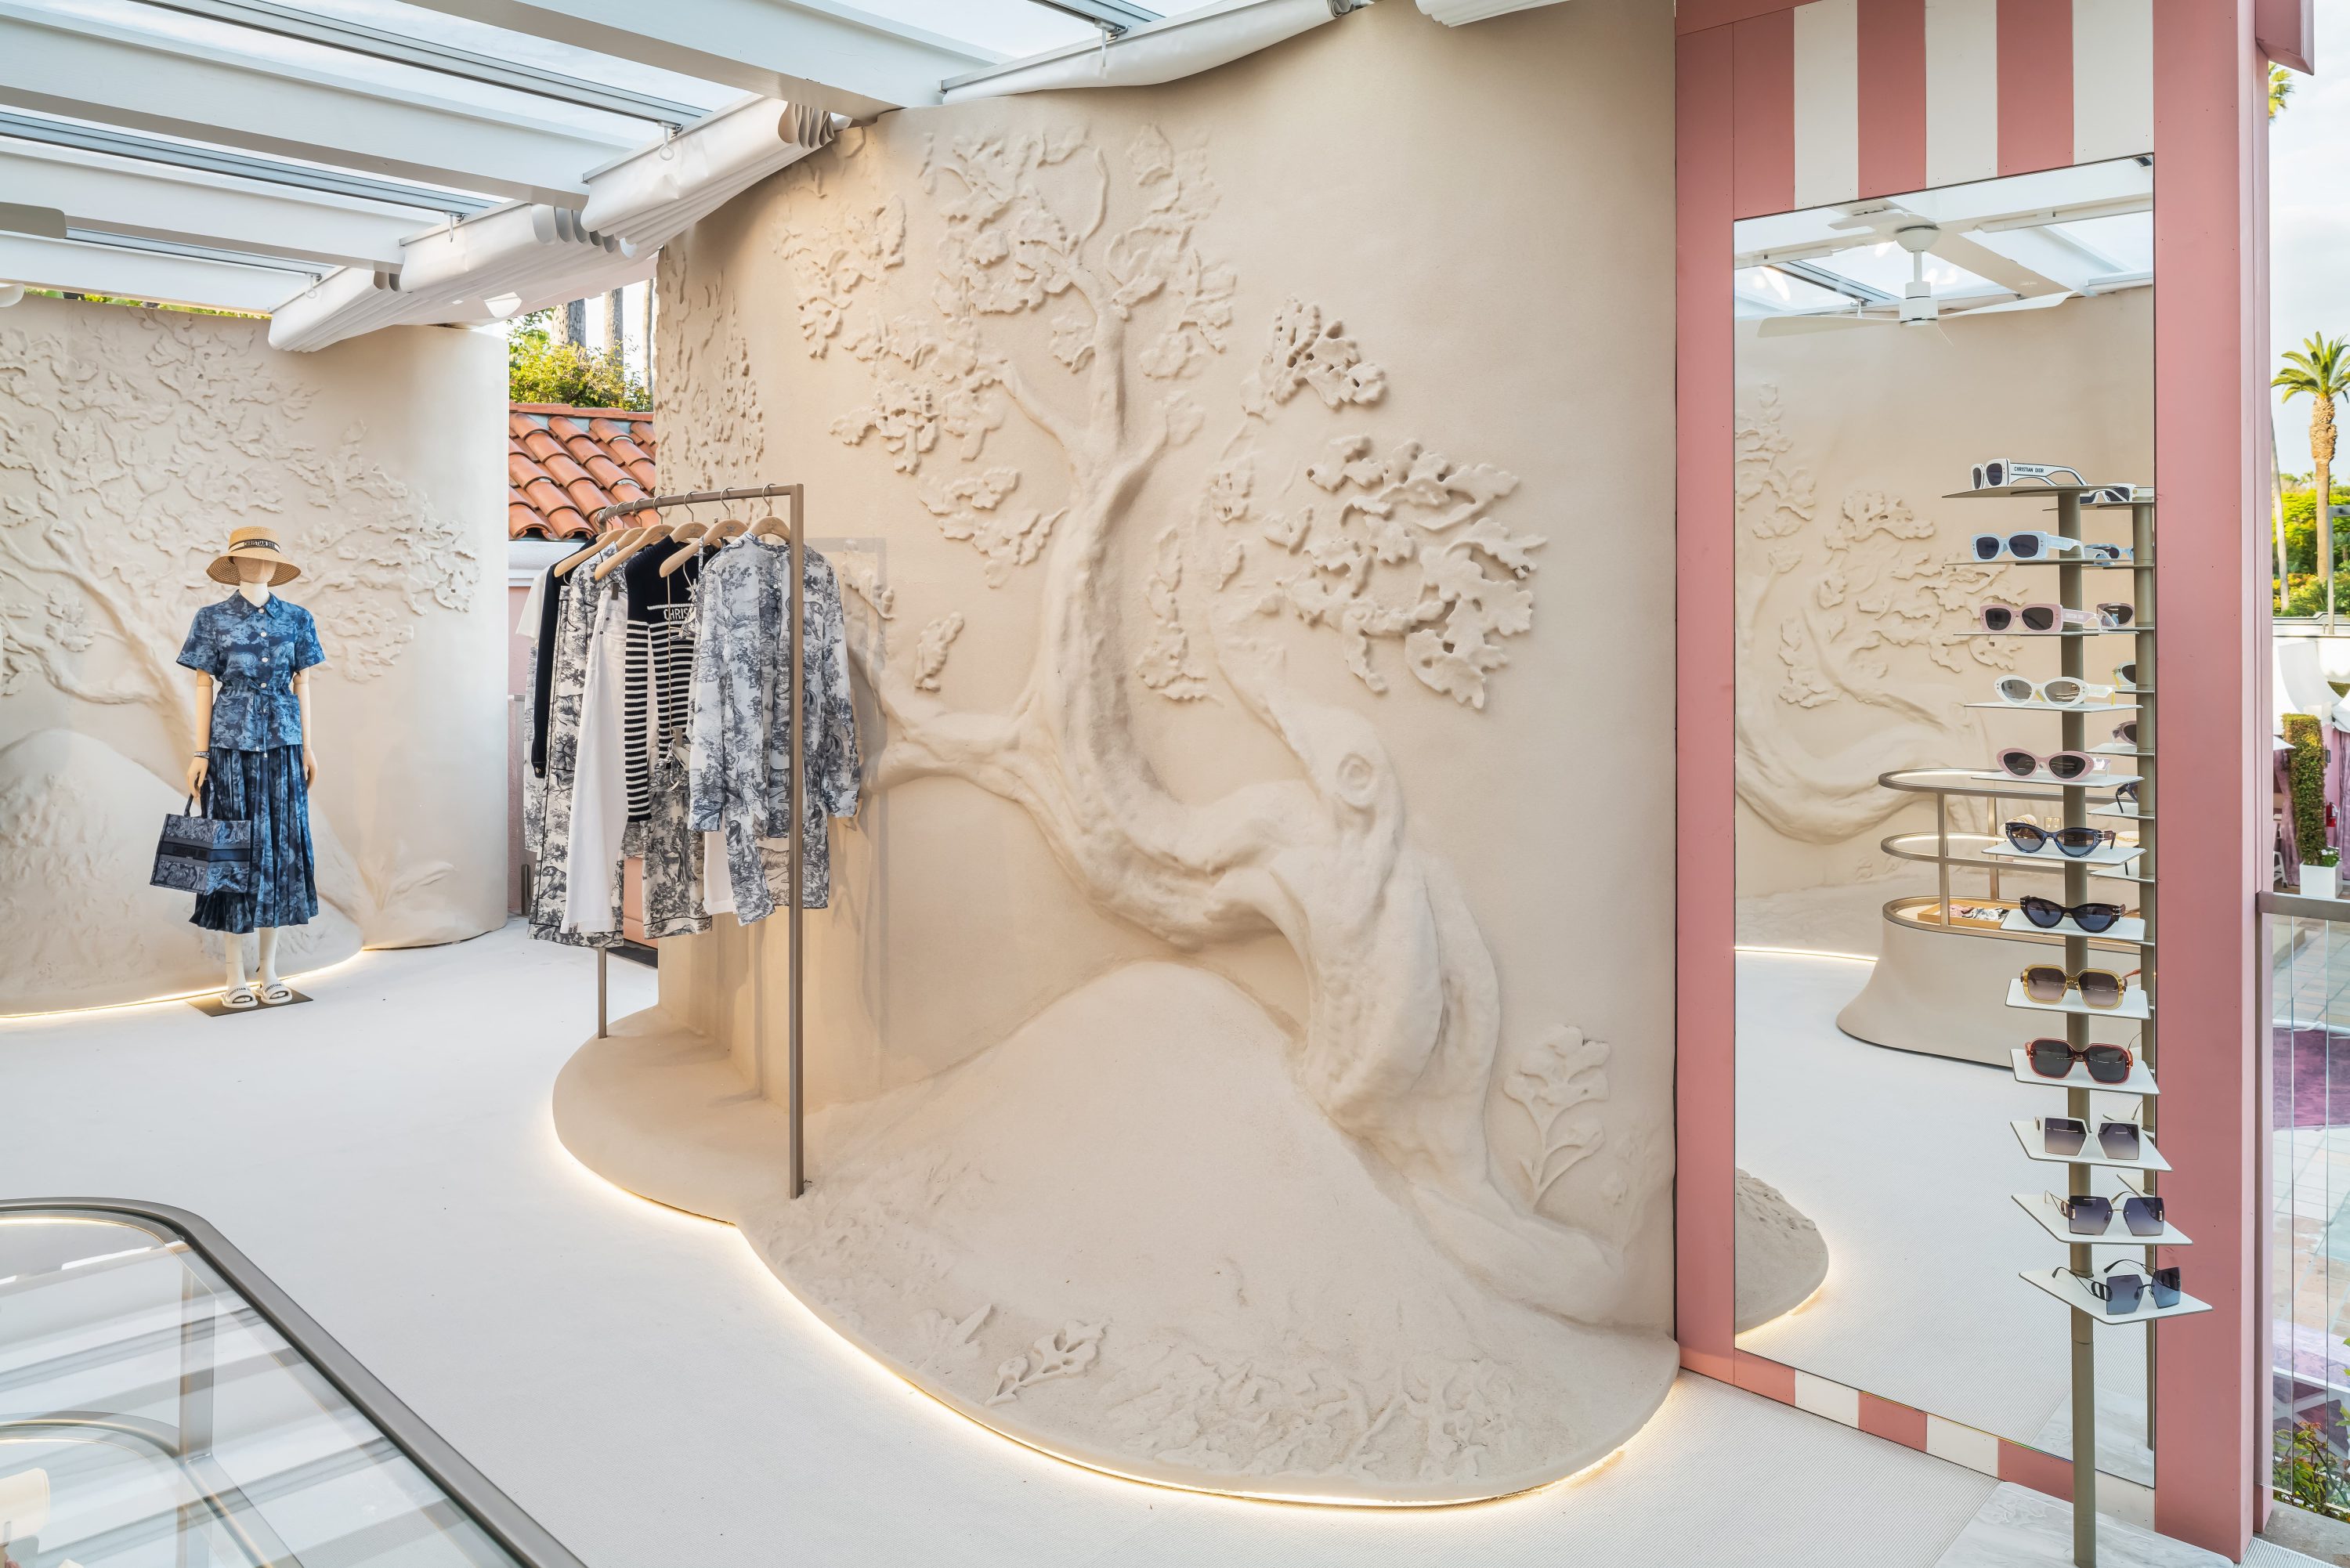 Dior Launches Dioriviera Pop-Up Experience at Luxury Hotel in